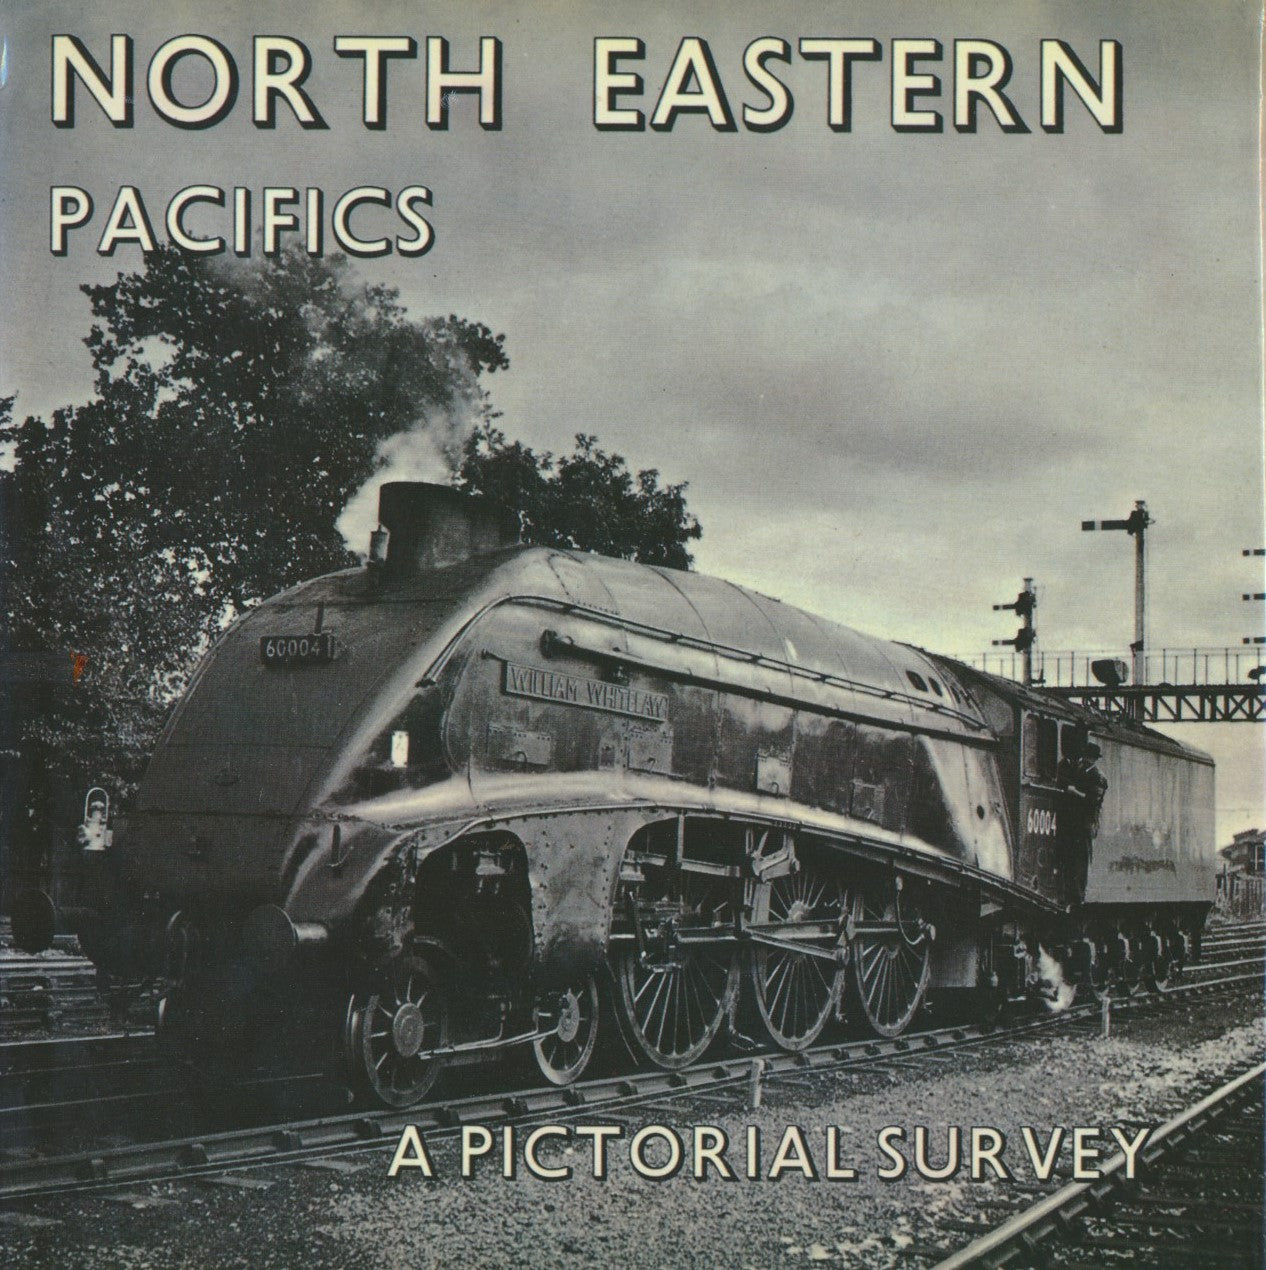 North Eastern Pacifics - A Pictorial Survey